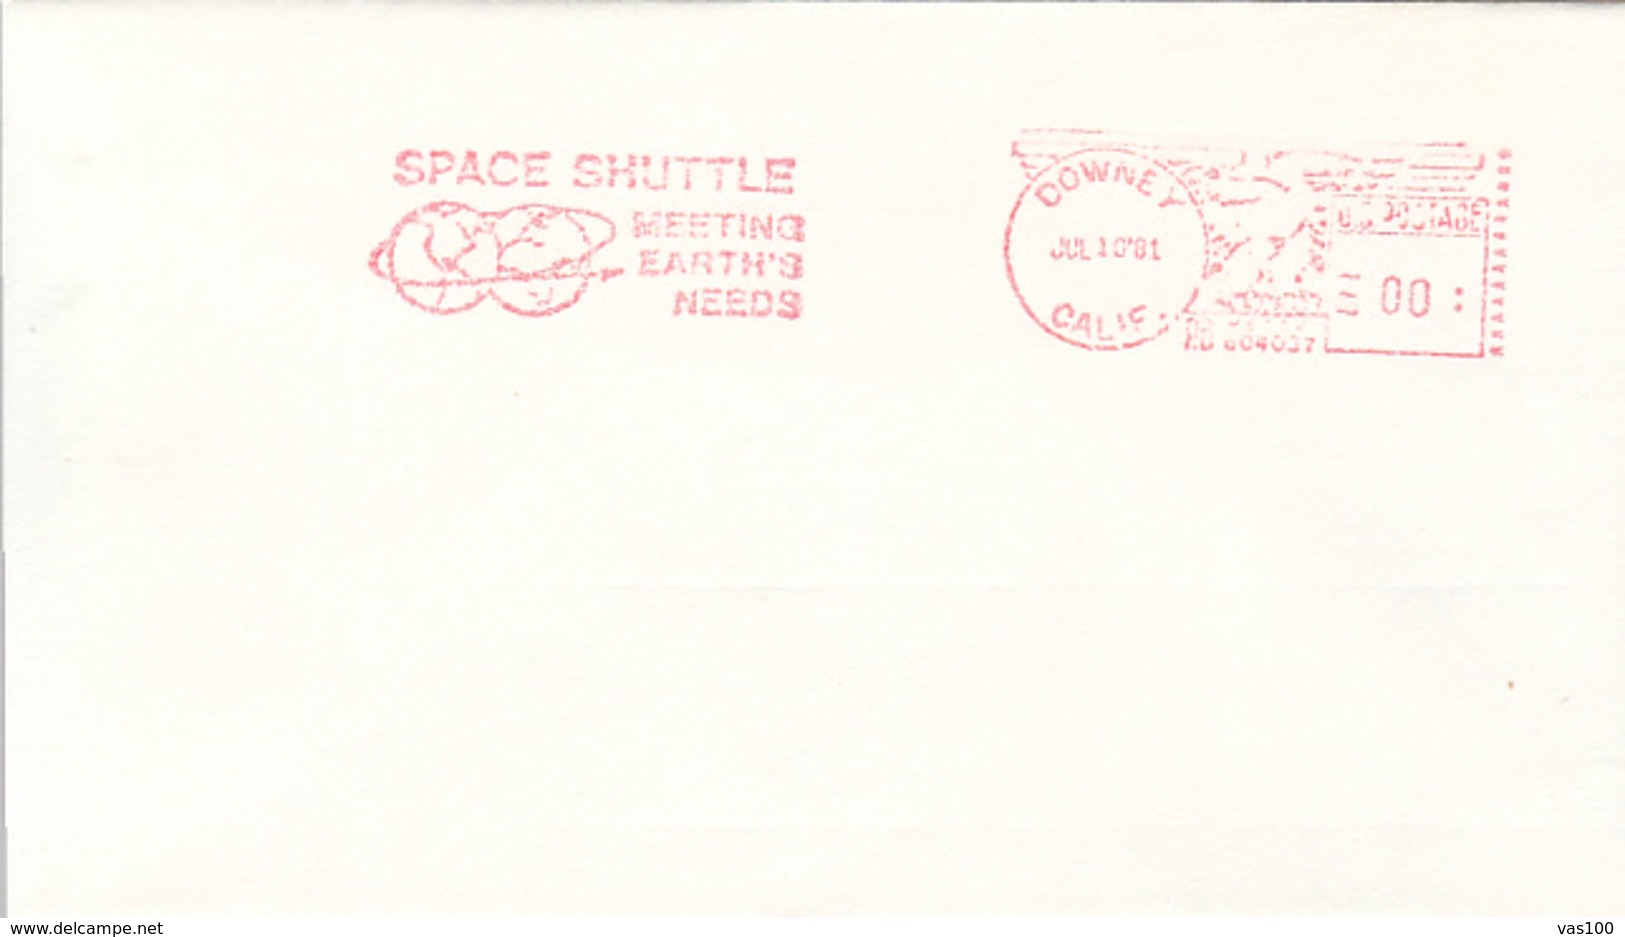 SPACE, COSMOS, SPACE SHUTTLE MEETING EARTH'S NEEDS, DOWNEY, RED MACHINE STAMPS ON COVER, 1981, USA - North  America